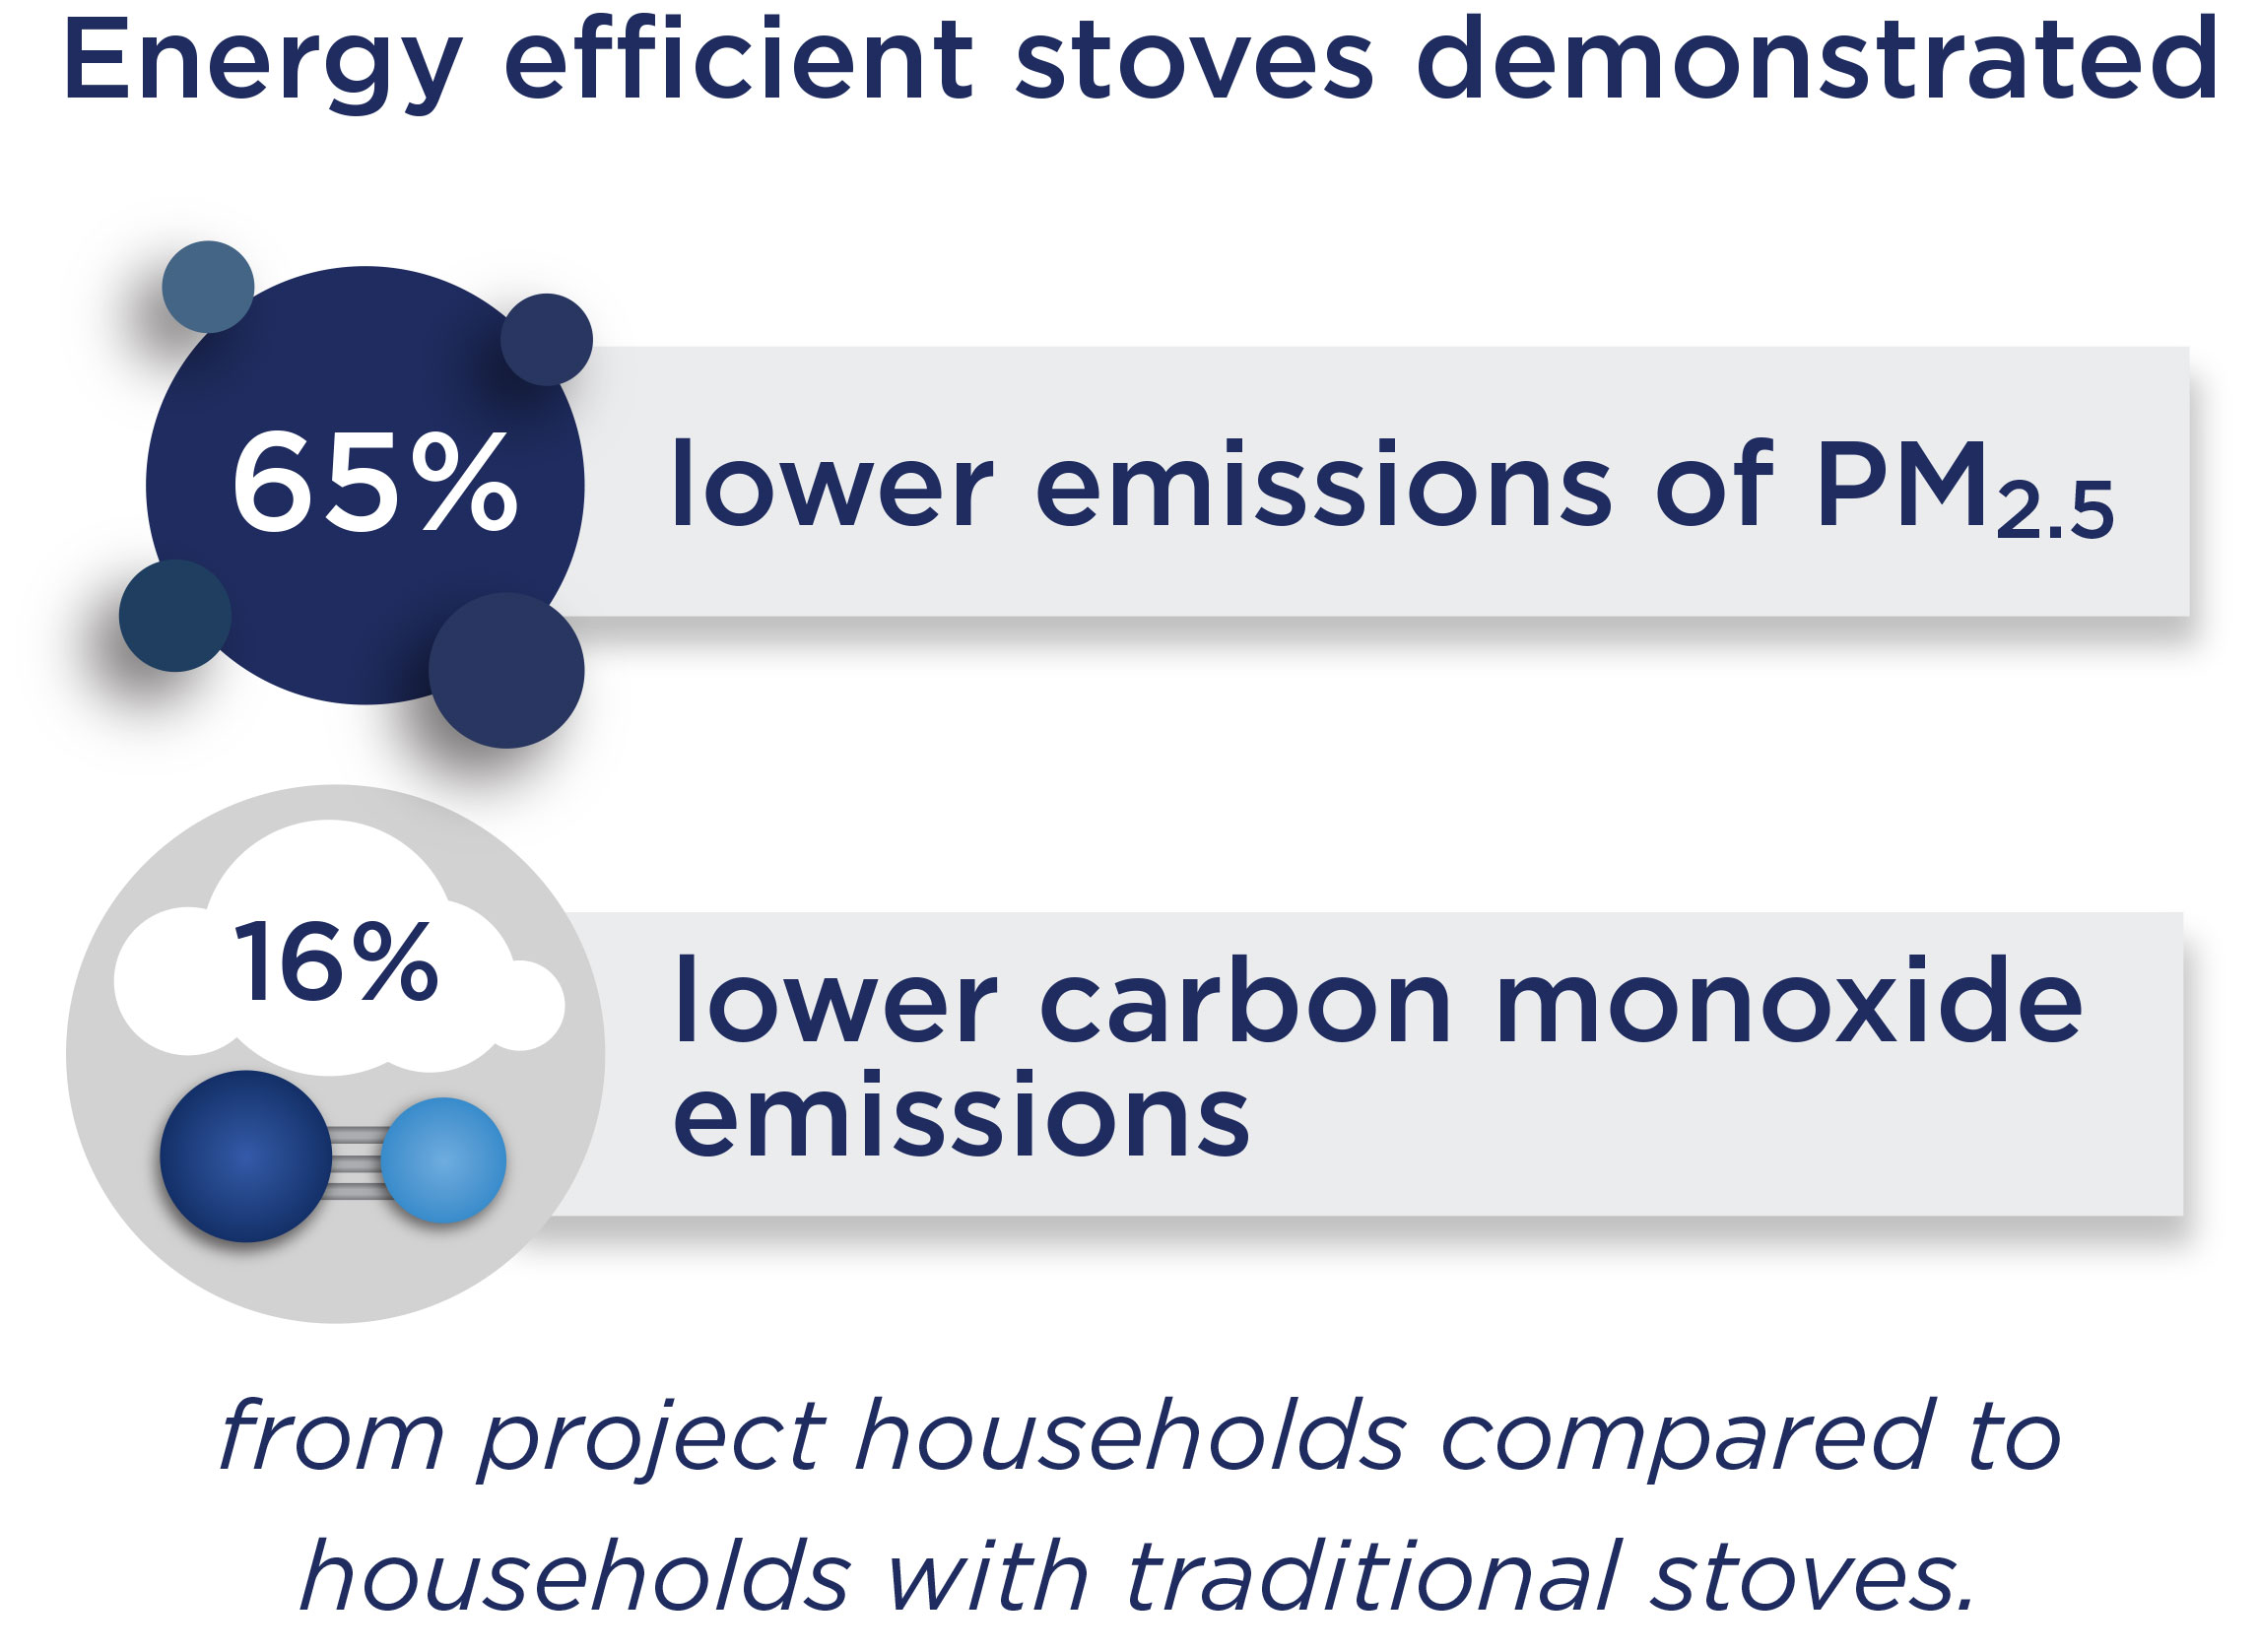 Energy efficient stoves demonstrated 65 percent lower emissions than traditional stoves.